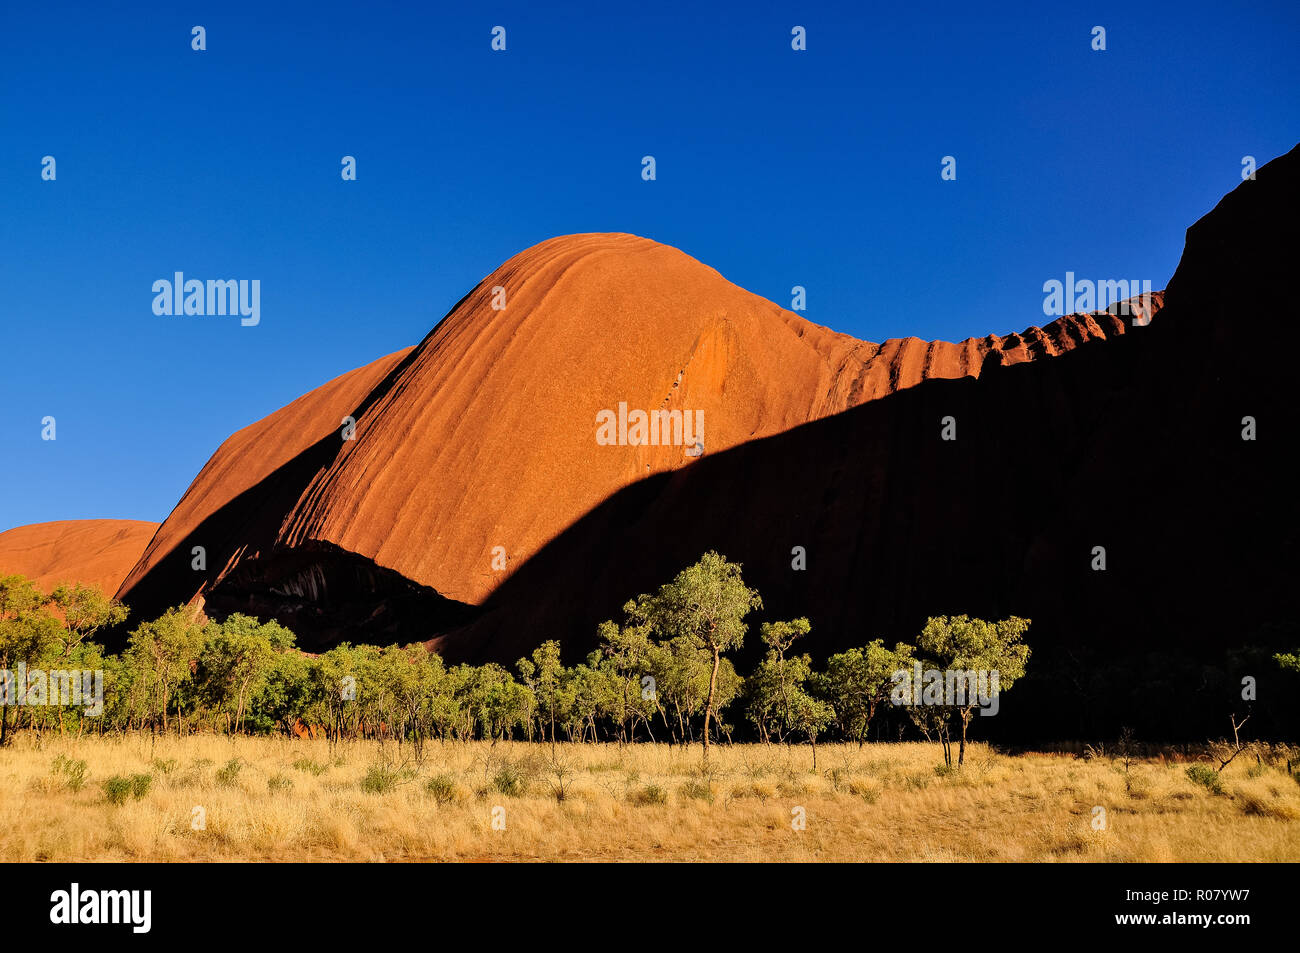 OUTBACK, AUSTRALIA - APRIL 30, 2009: red-orange Uluru, Ayers Rock after sunrise against a deep blue sky - one of the UMESCO world heritage sites Stock Photo